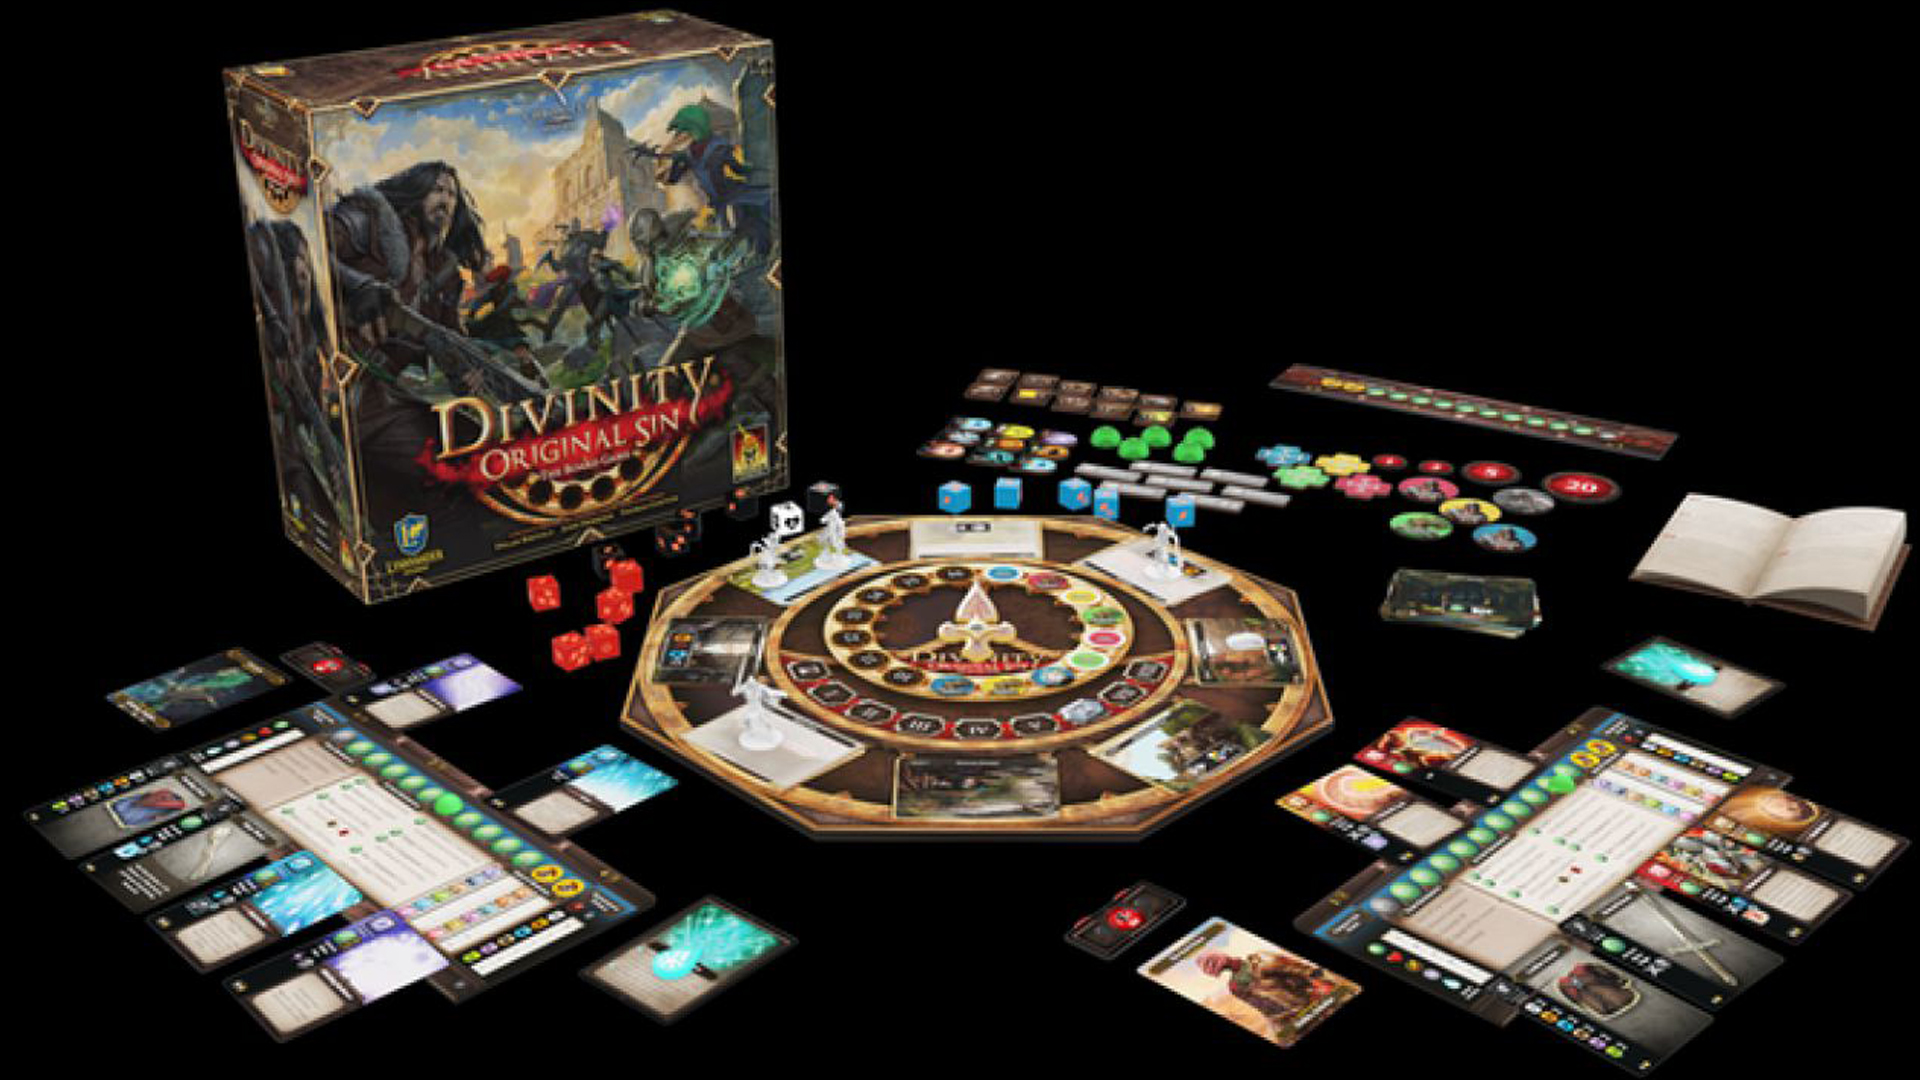 Divinity Original Sin board game will give you new ways